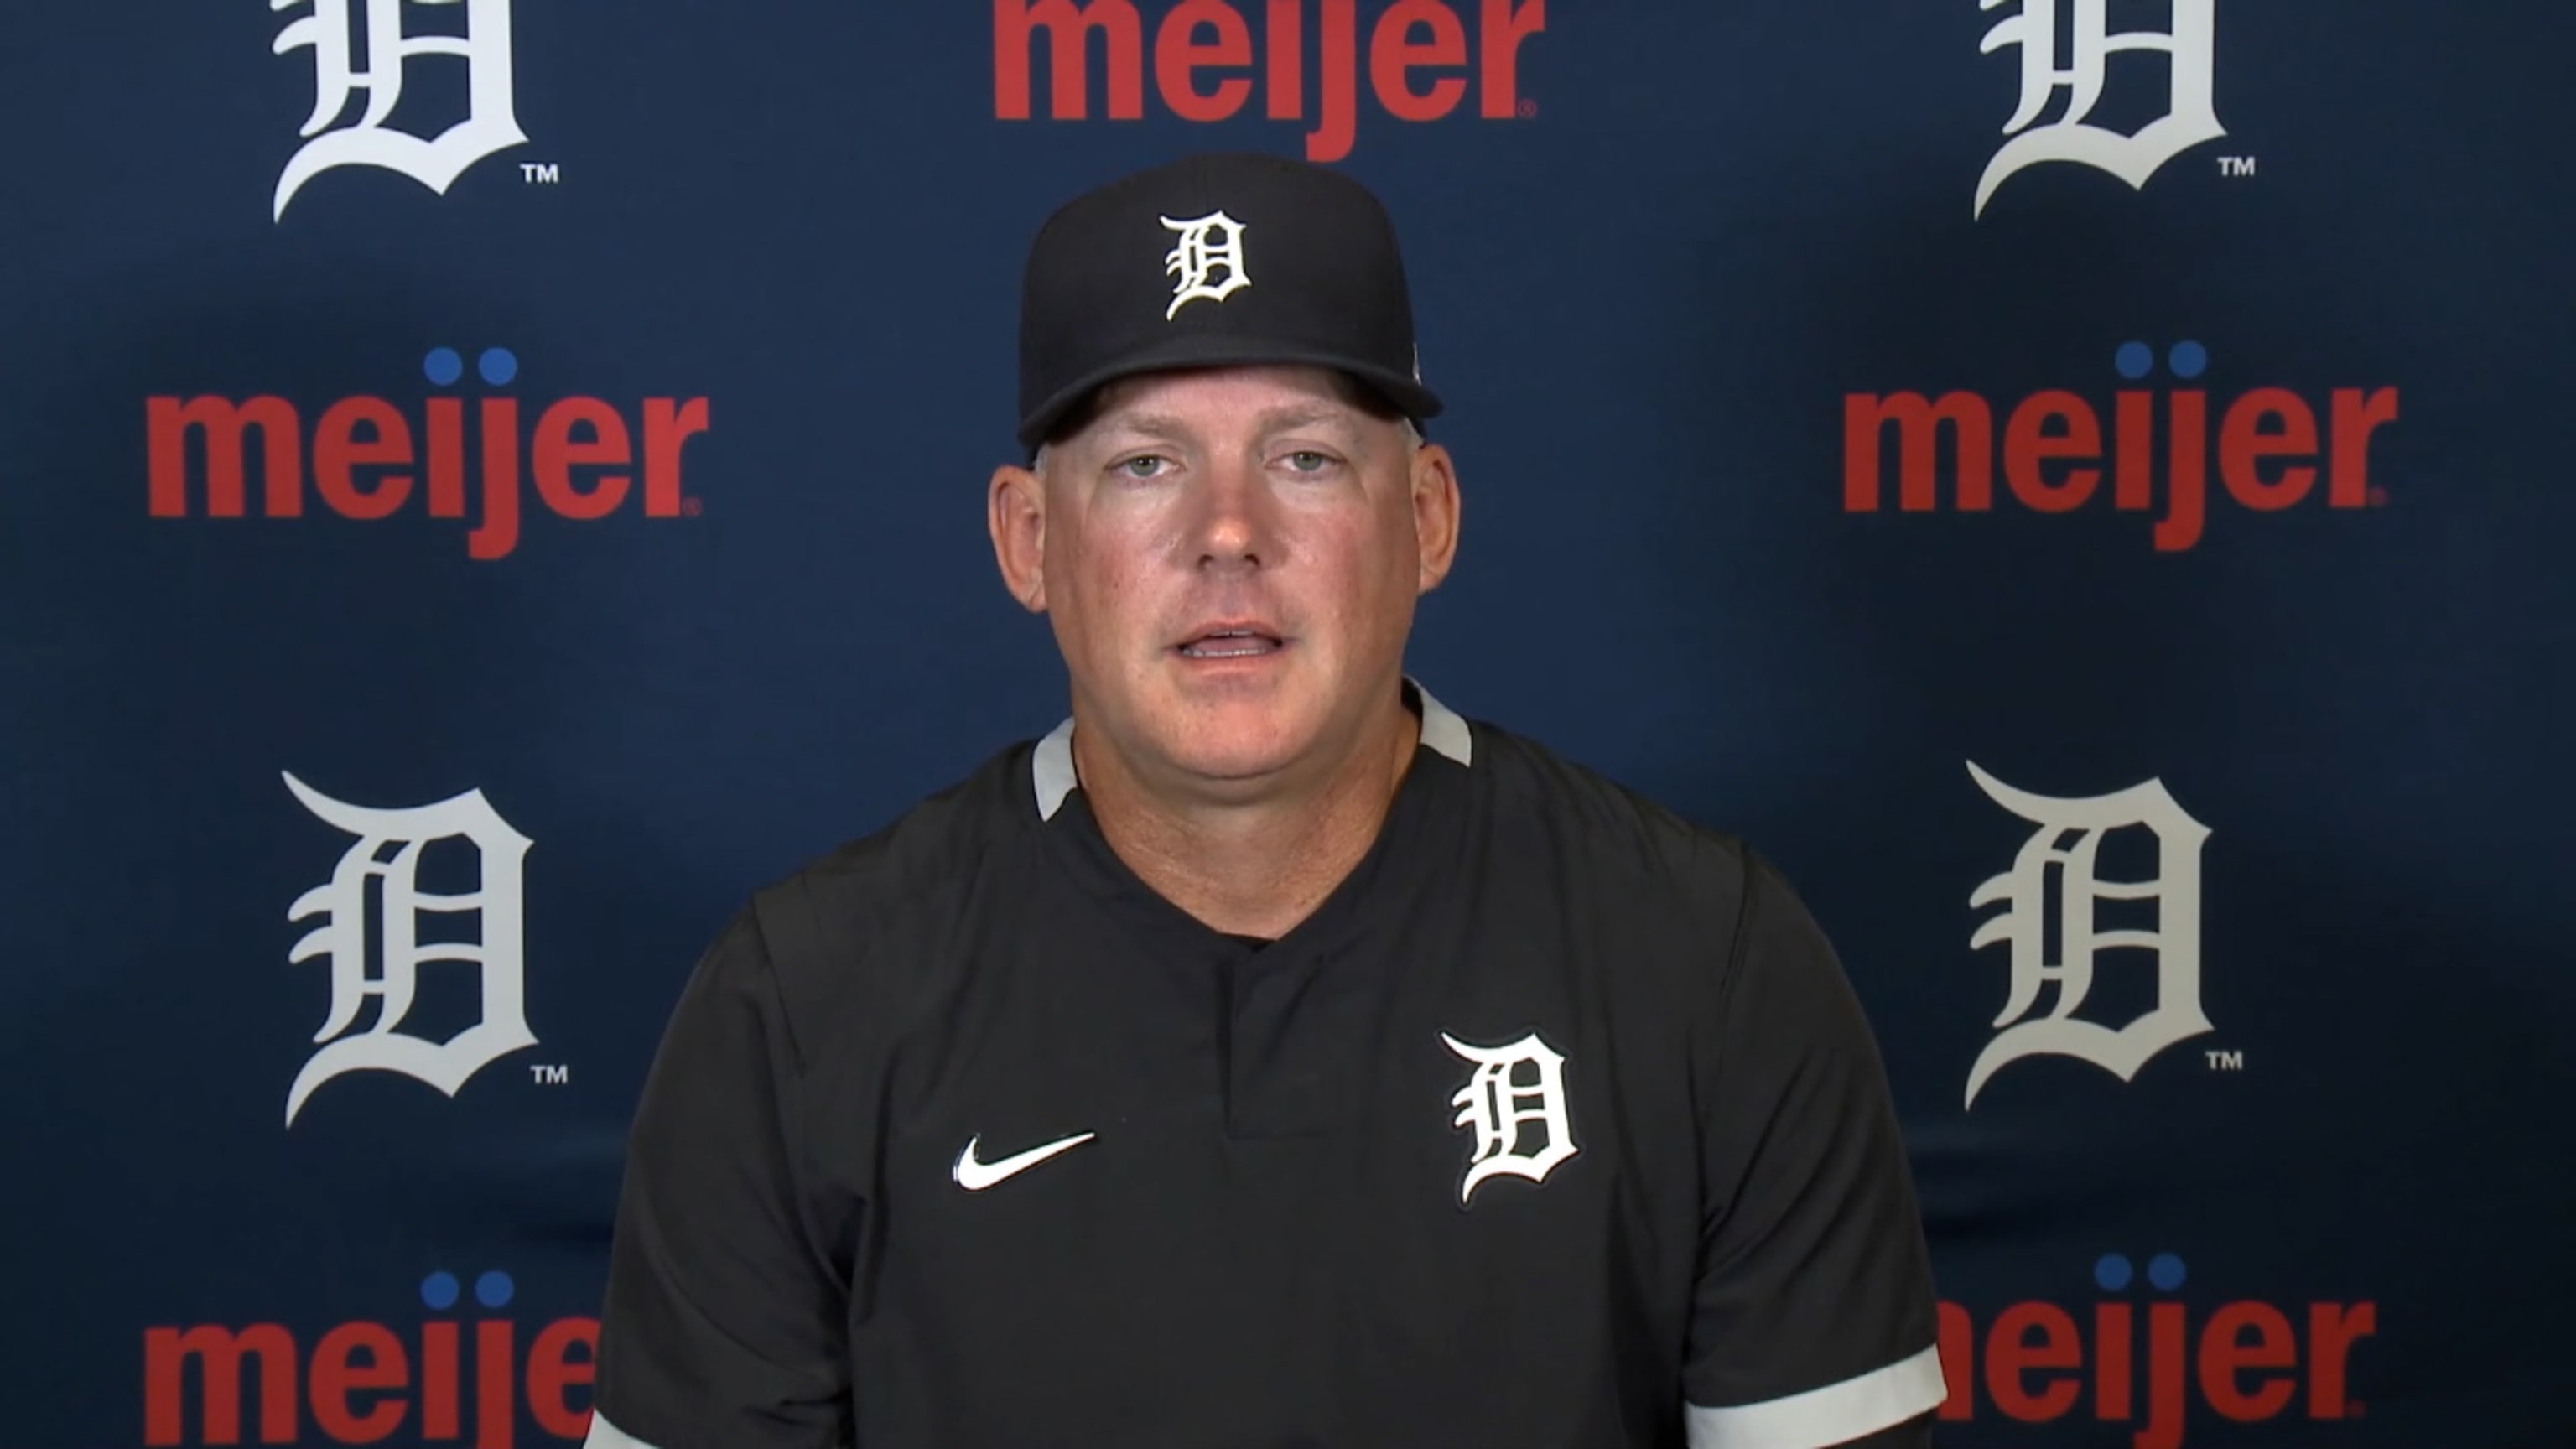 Nightside Report Aug. 22, 2021: Miguel Cabrera joins 500 home run